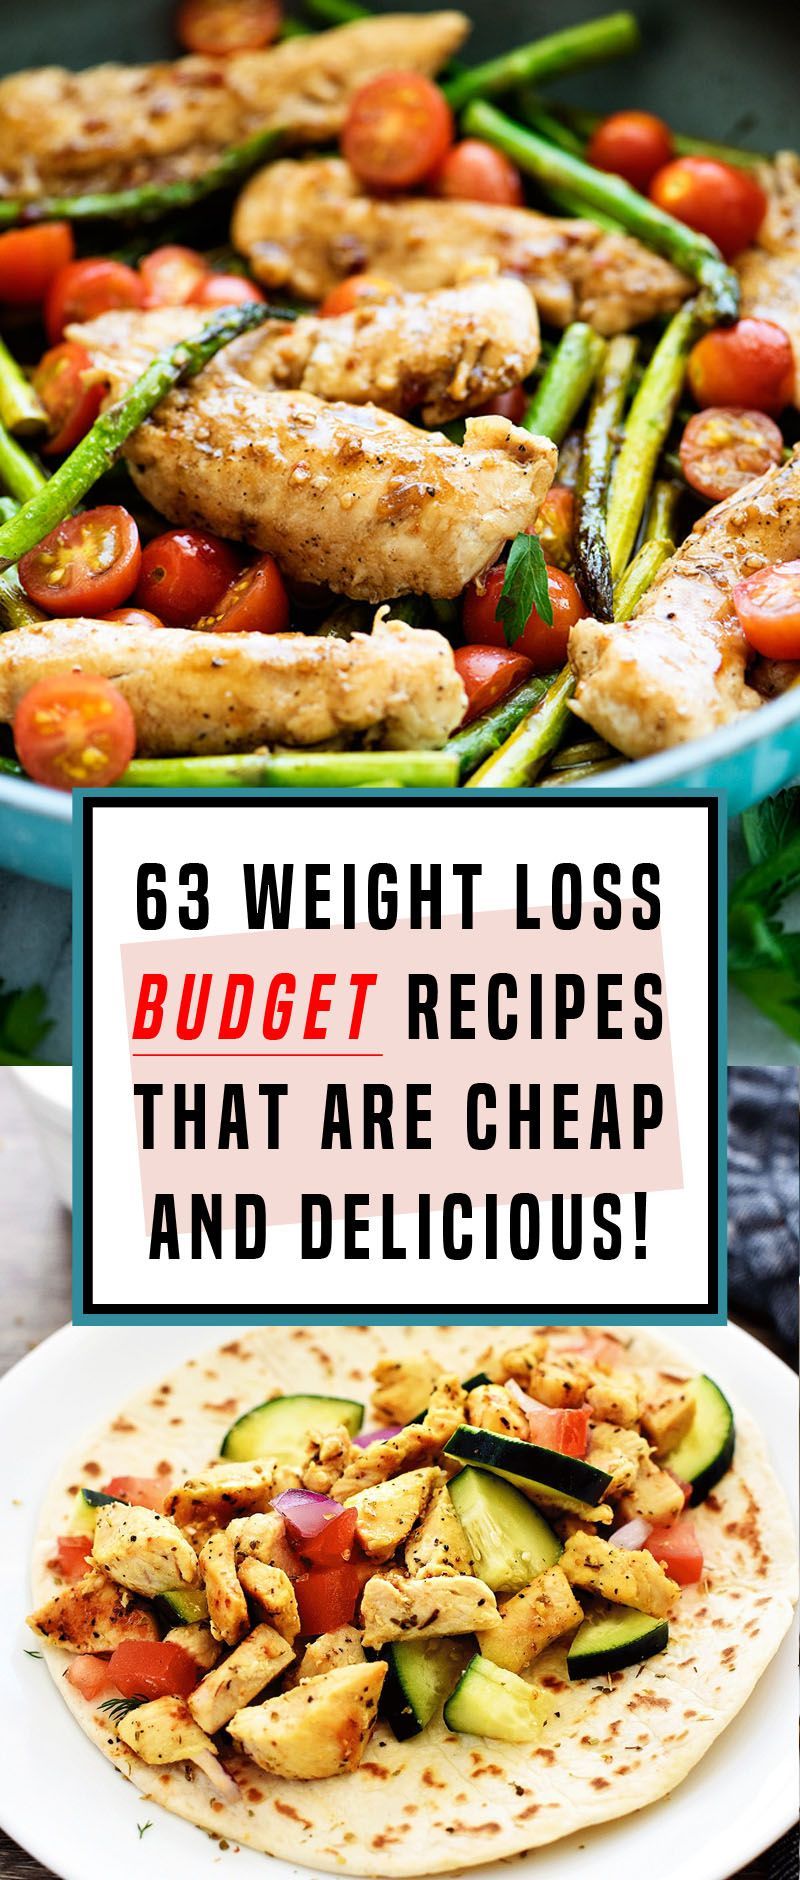 63 Budget Weight Loss Recipes That Will Help You Lose Fat, Not Money! -   14 healthy recipes On A Budget weightloss
 ideas